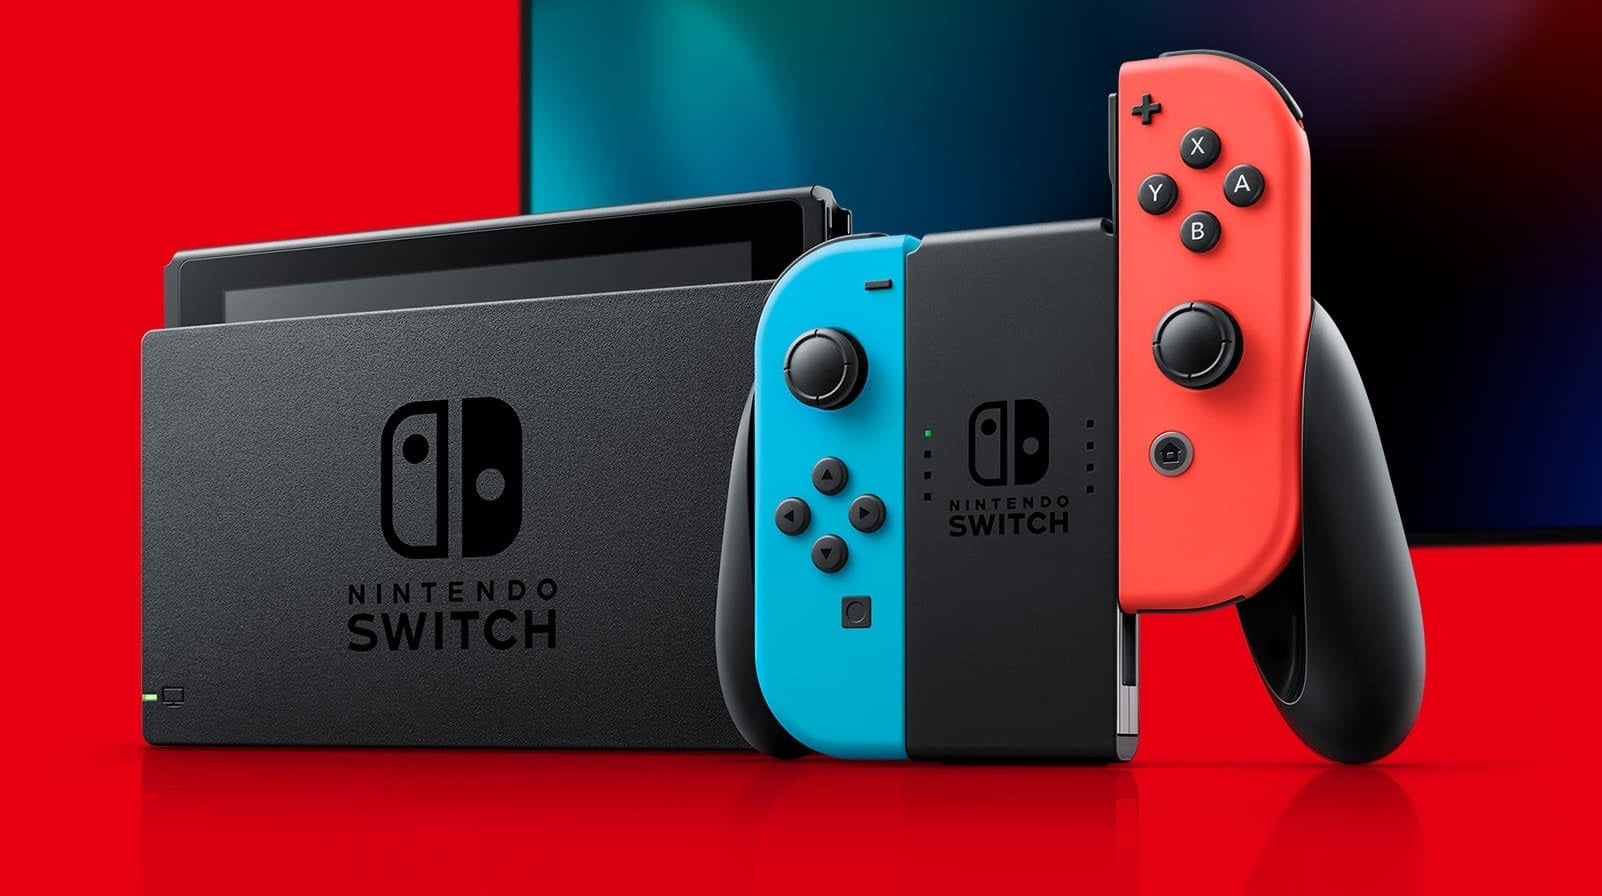 Image for Switch sales now at 55.77 million units, but Nintendo expects sales to take a hit this fiscal year